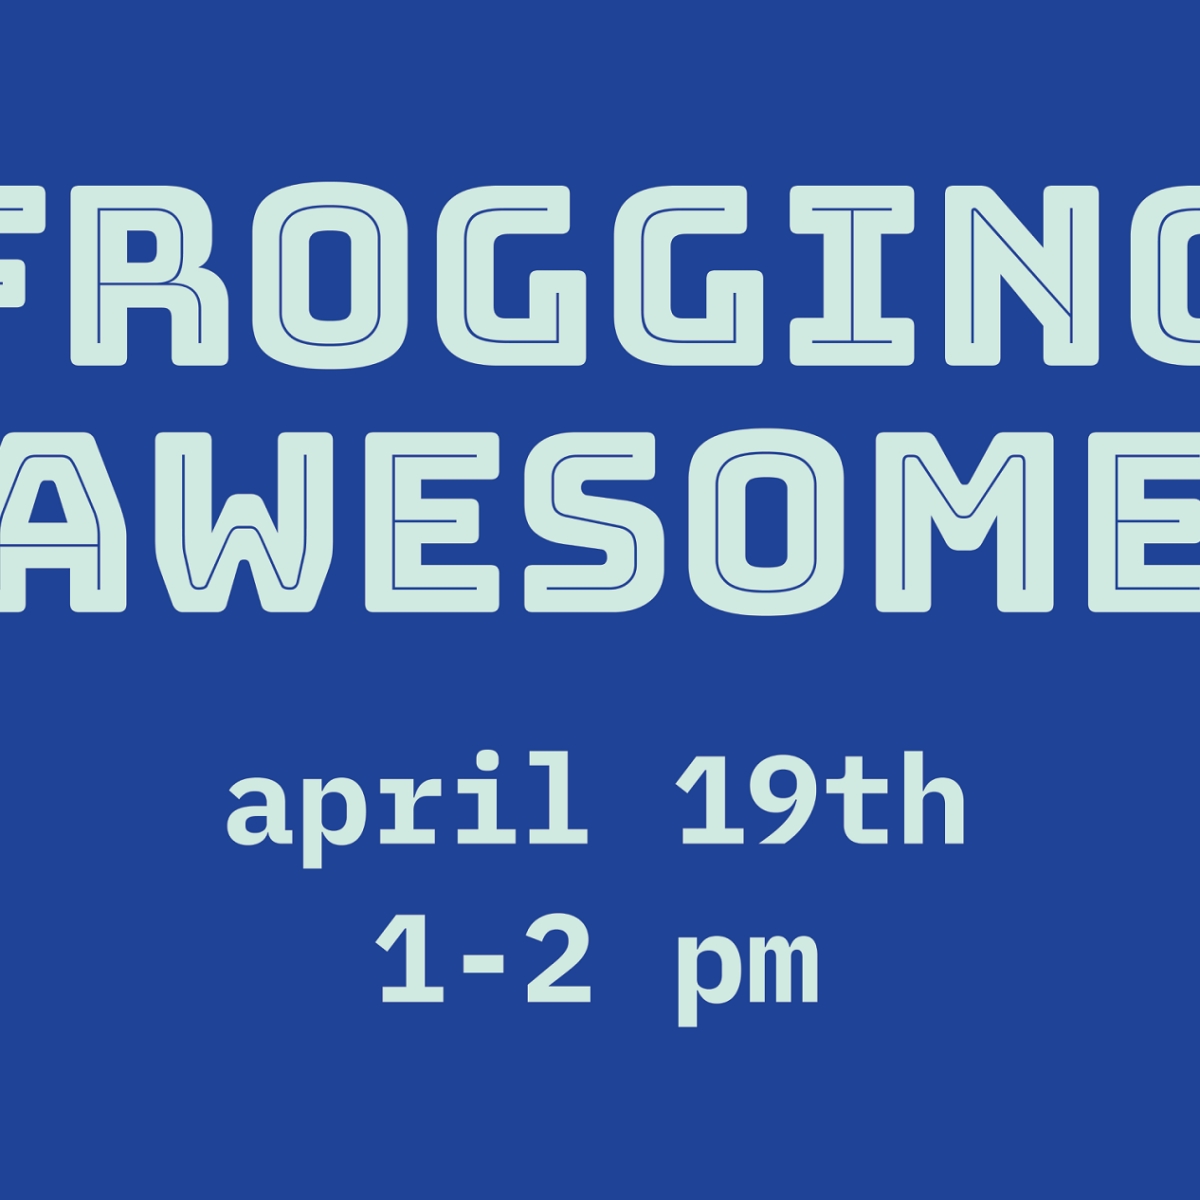 Image of poster advertising Frog Design event.